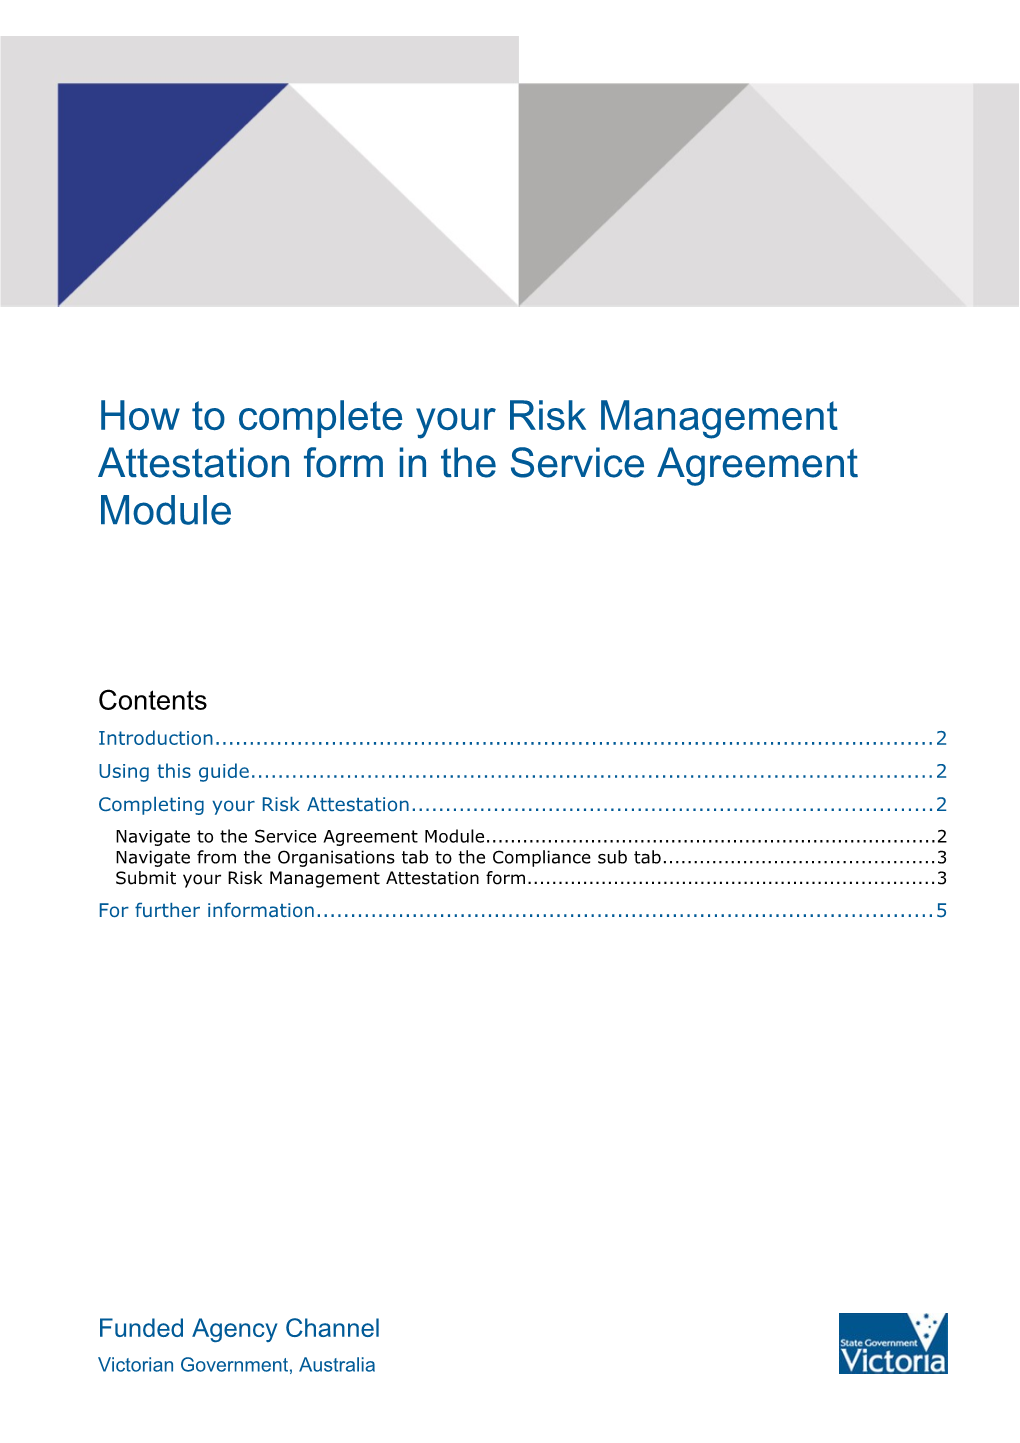 How to Complete Your Risk Attestation in Service Agreement Module V1.1